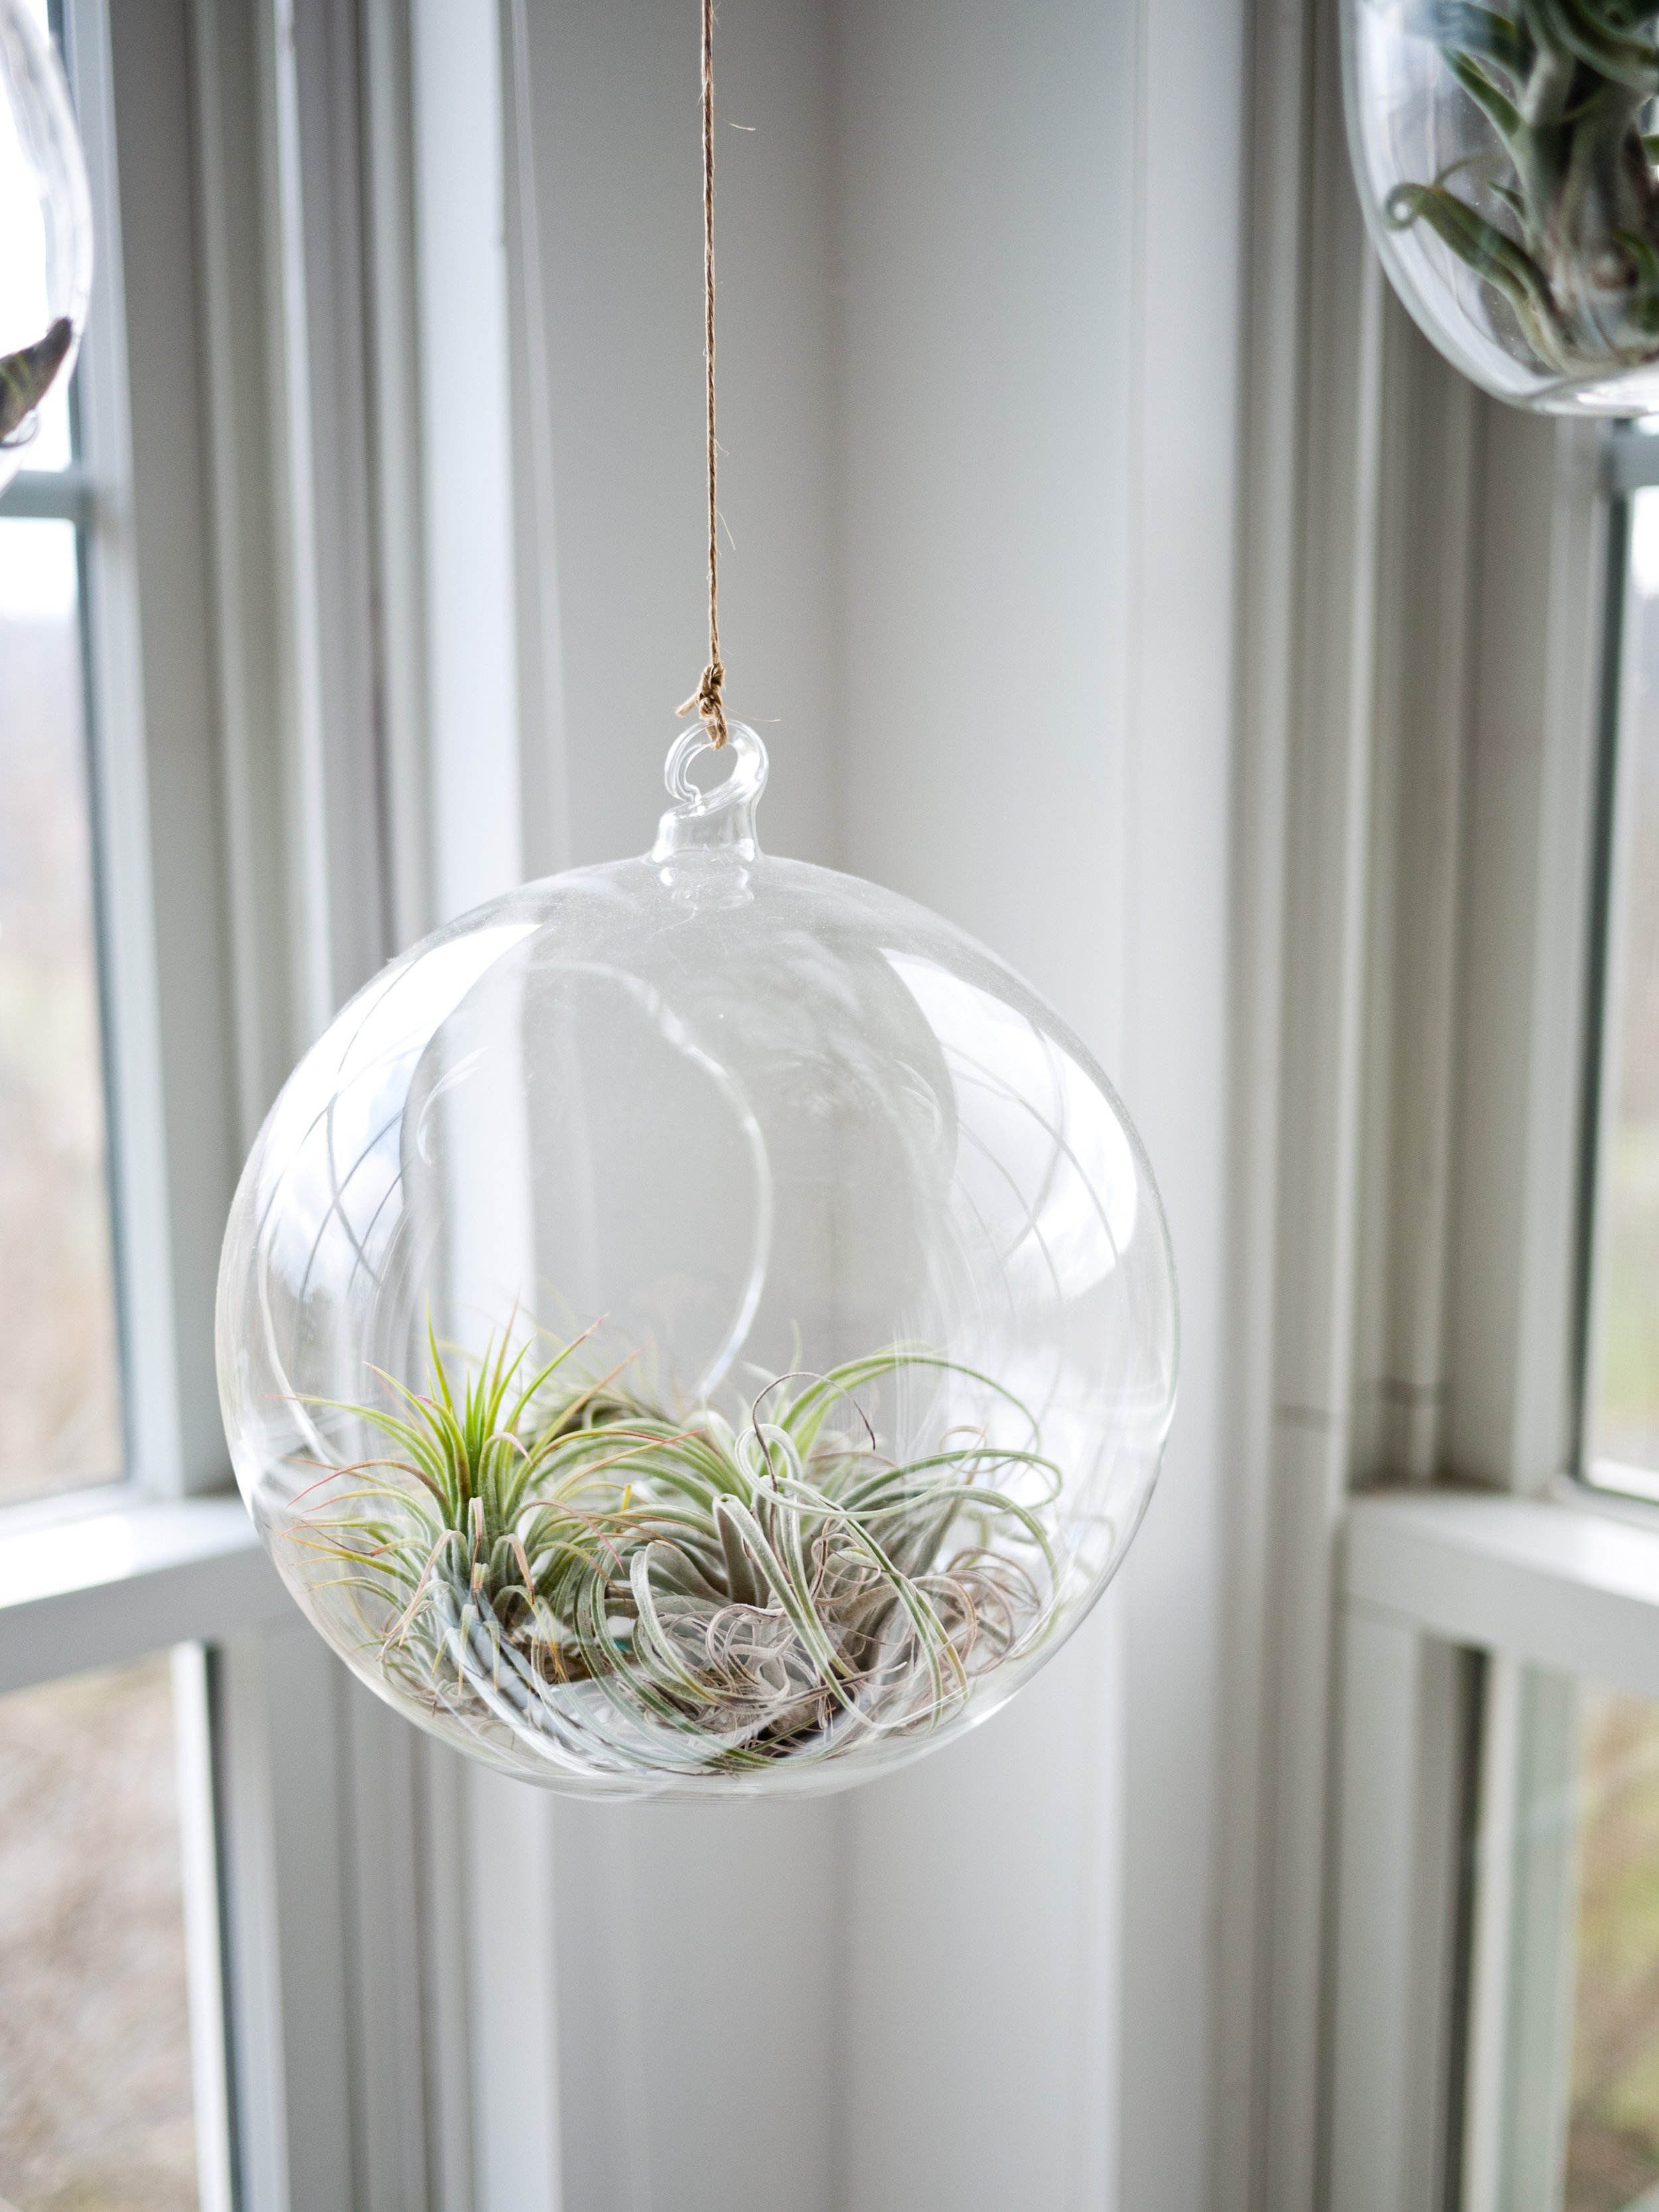 An air plant in a glass container.